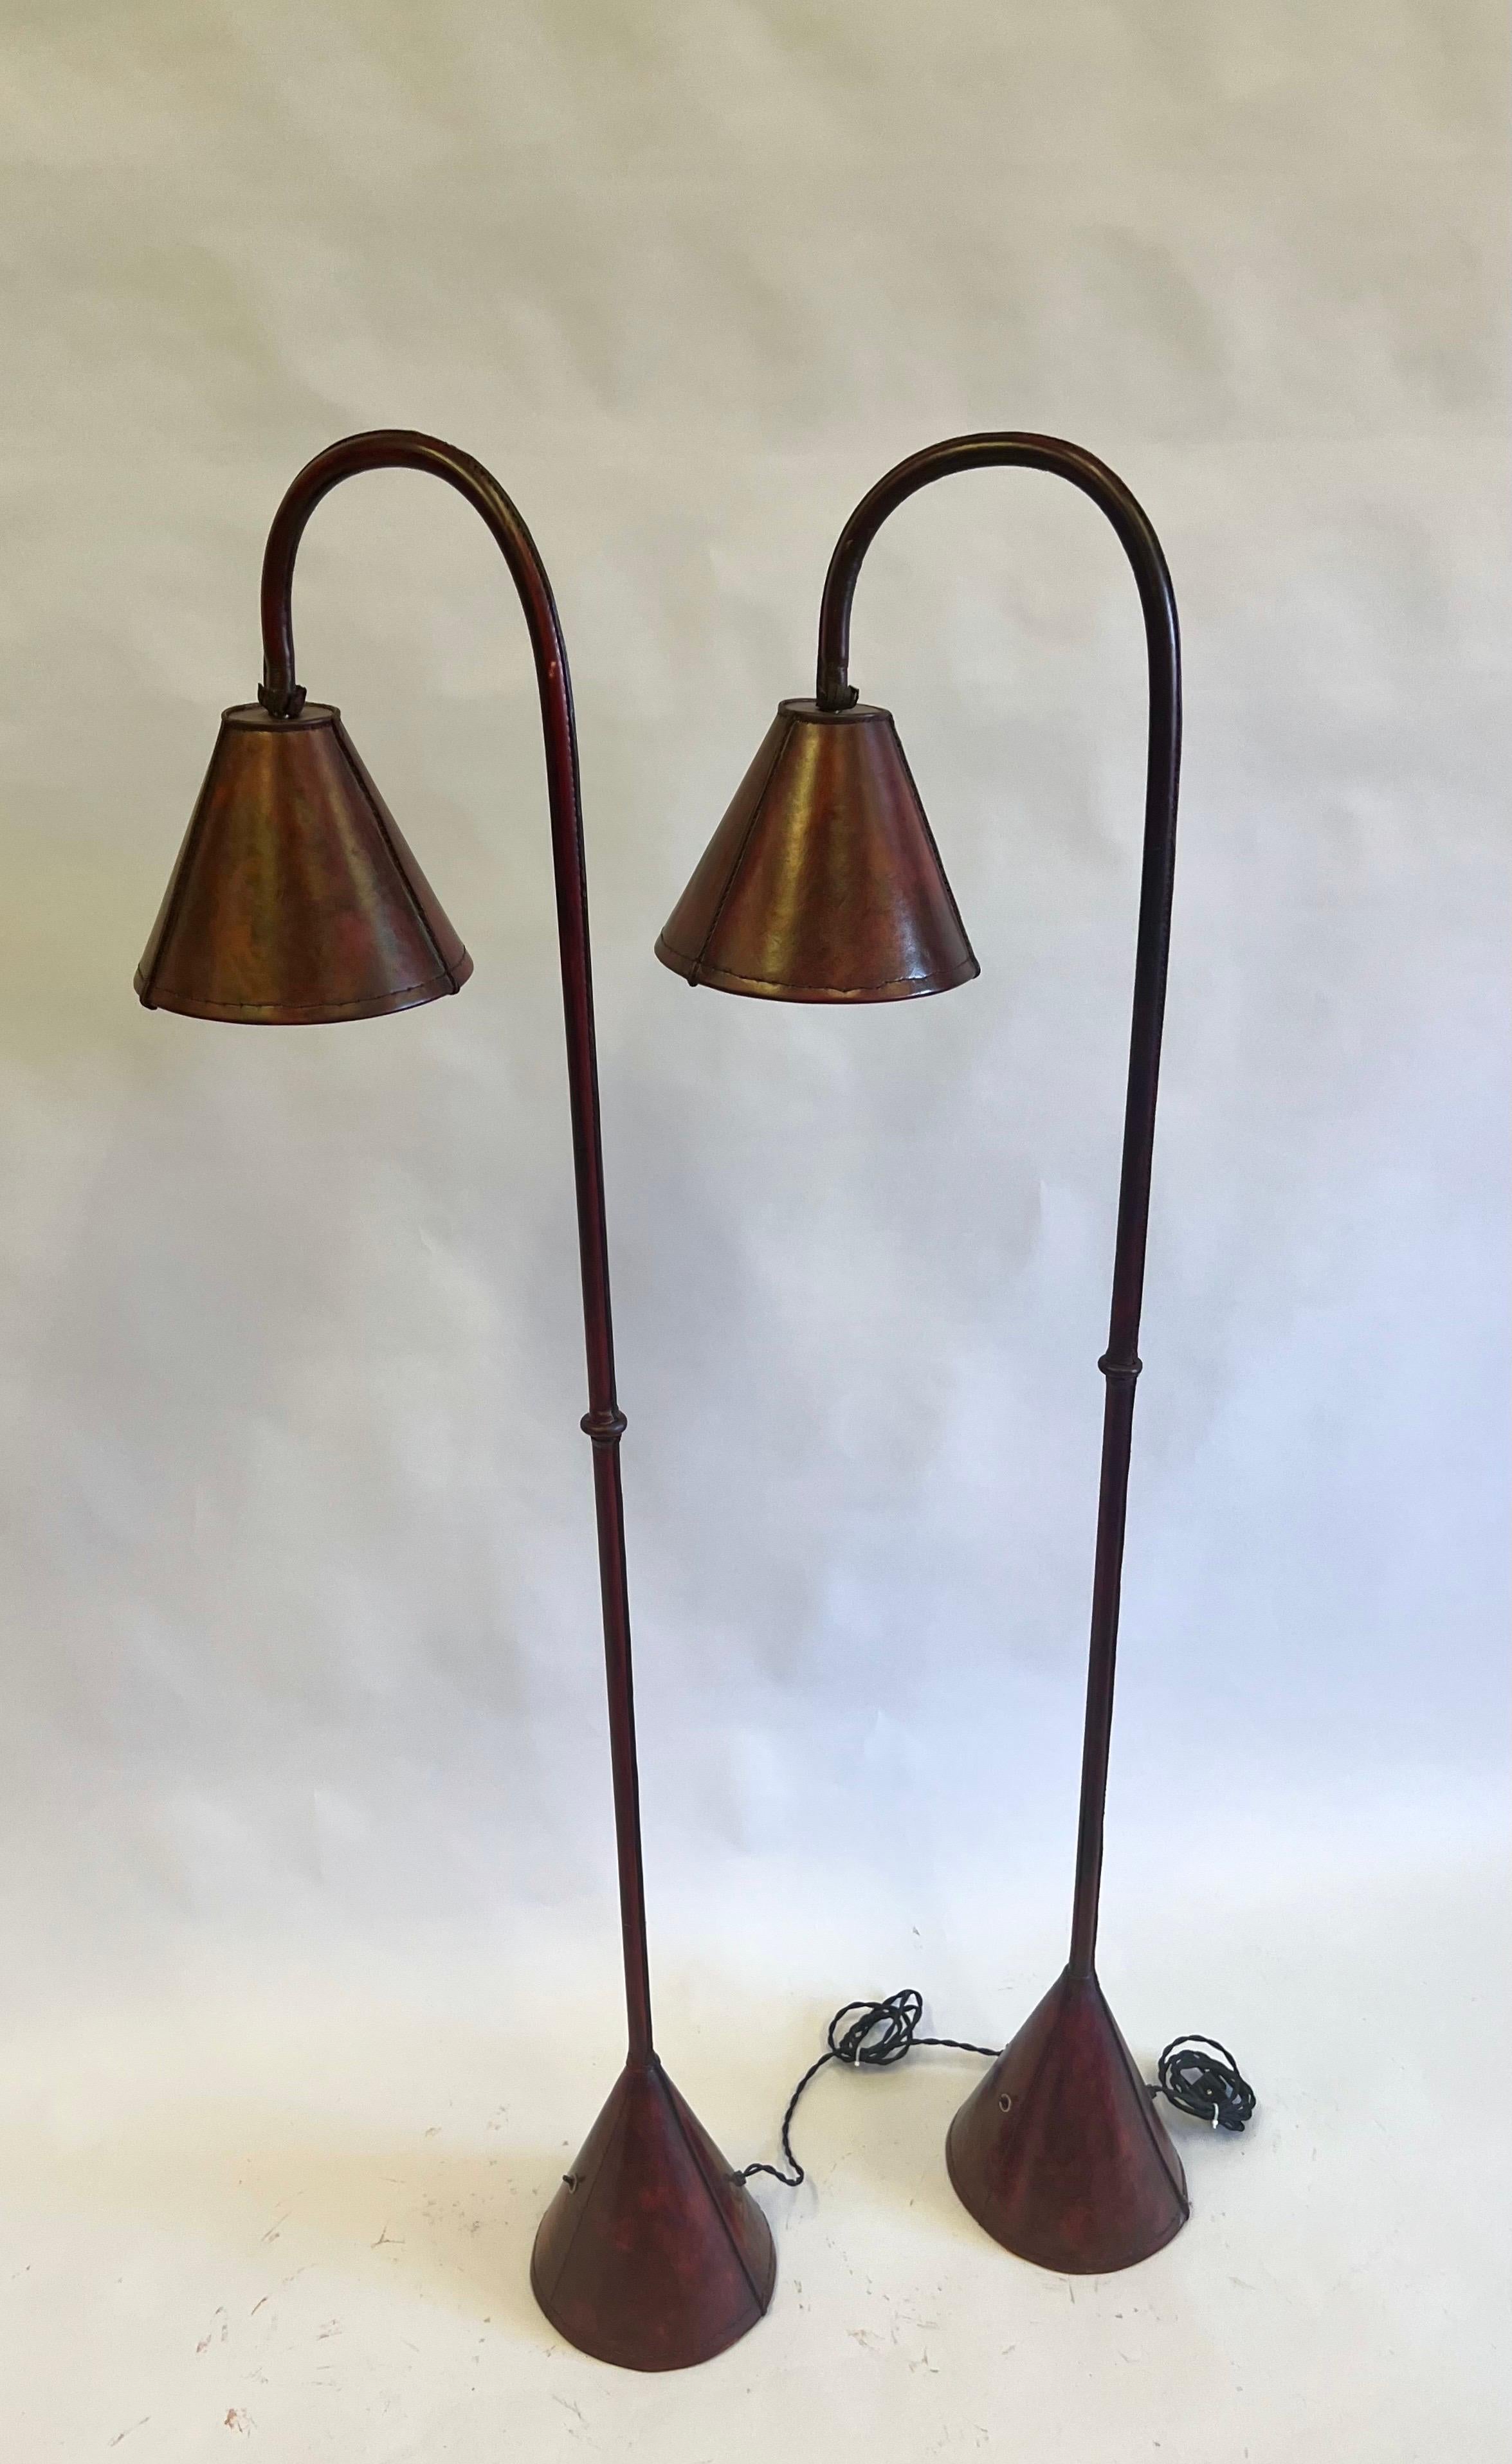 Hand-Crafted Pair, French Mid-Century Burgundy Stitched Leather Floor Lamps by Jacques Adnet For Sale